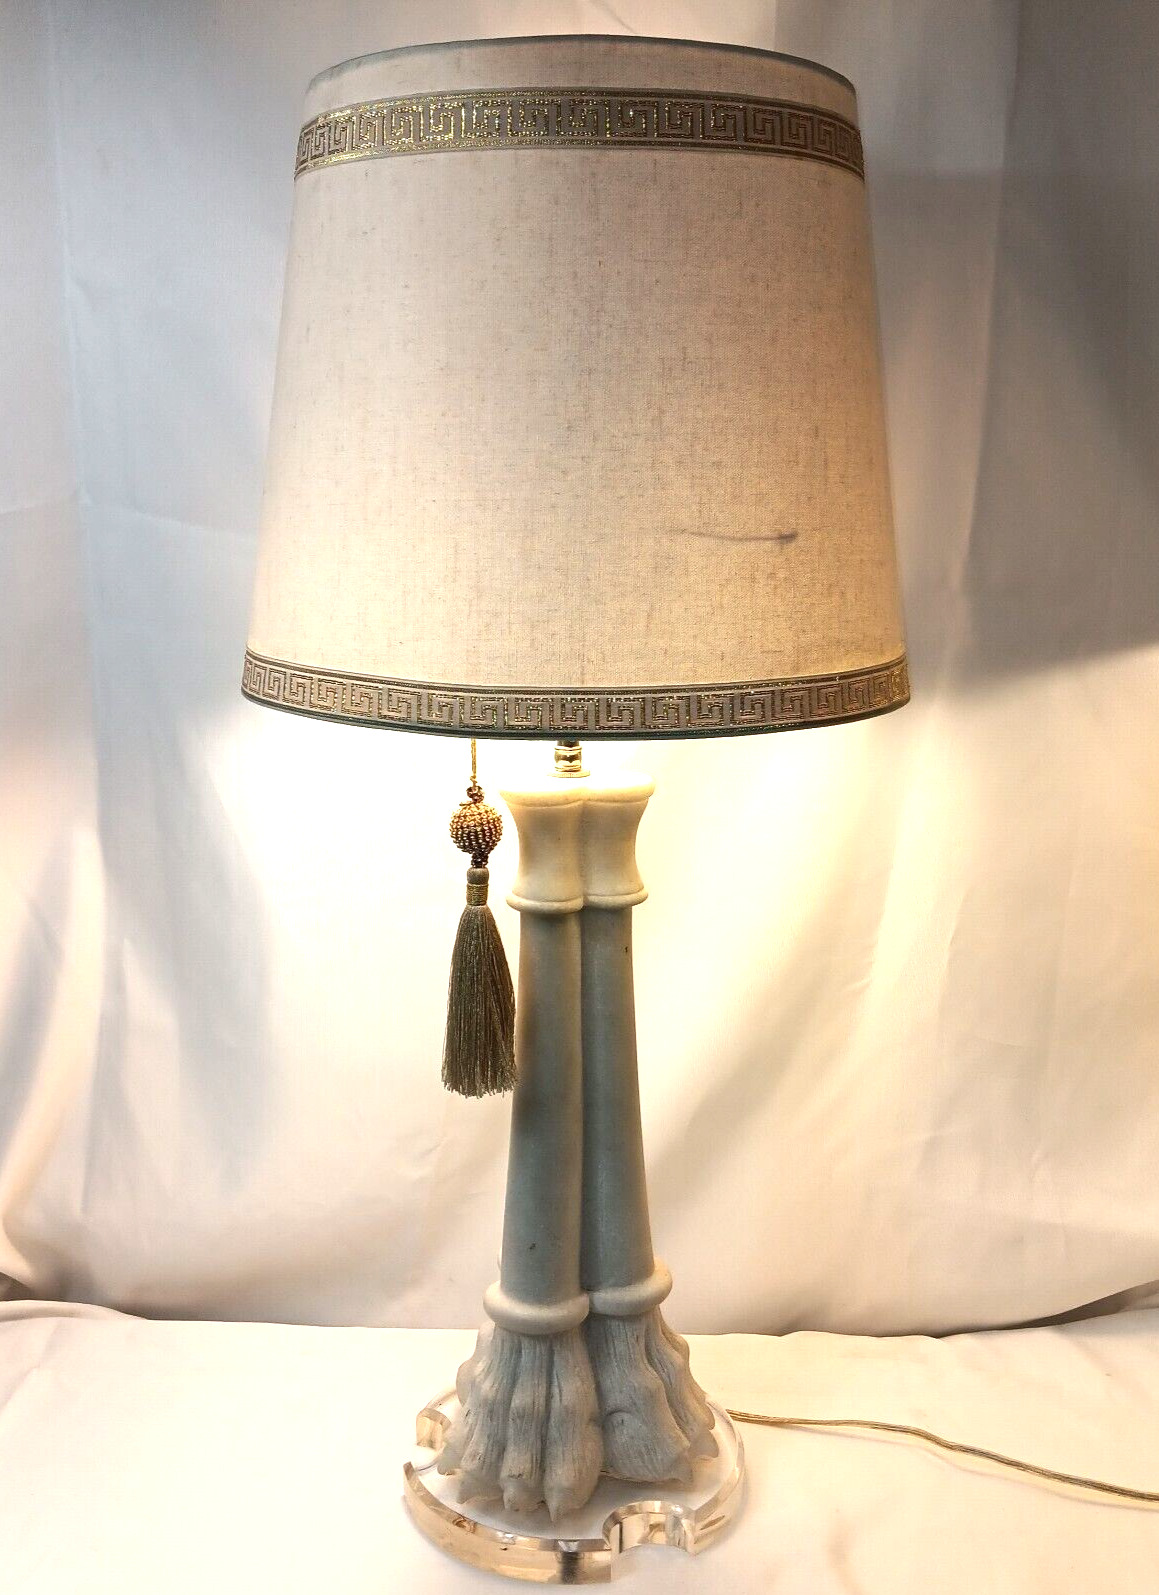 Rare Unique Vintage Claw Footed Lamp $475.00 OBO {ch}